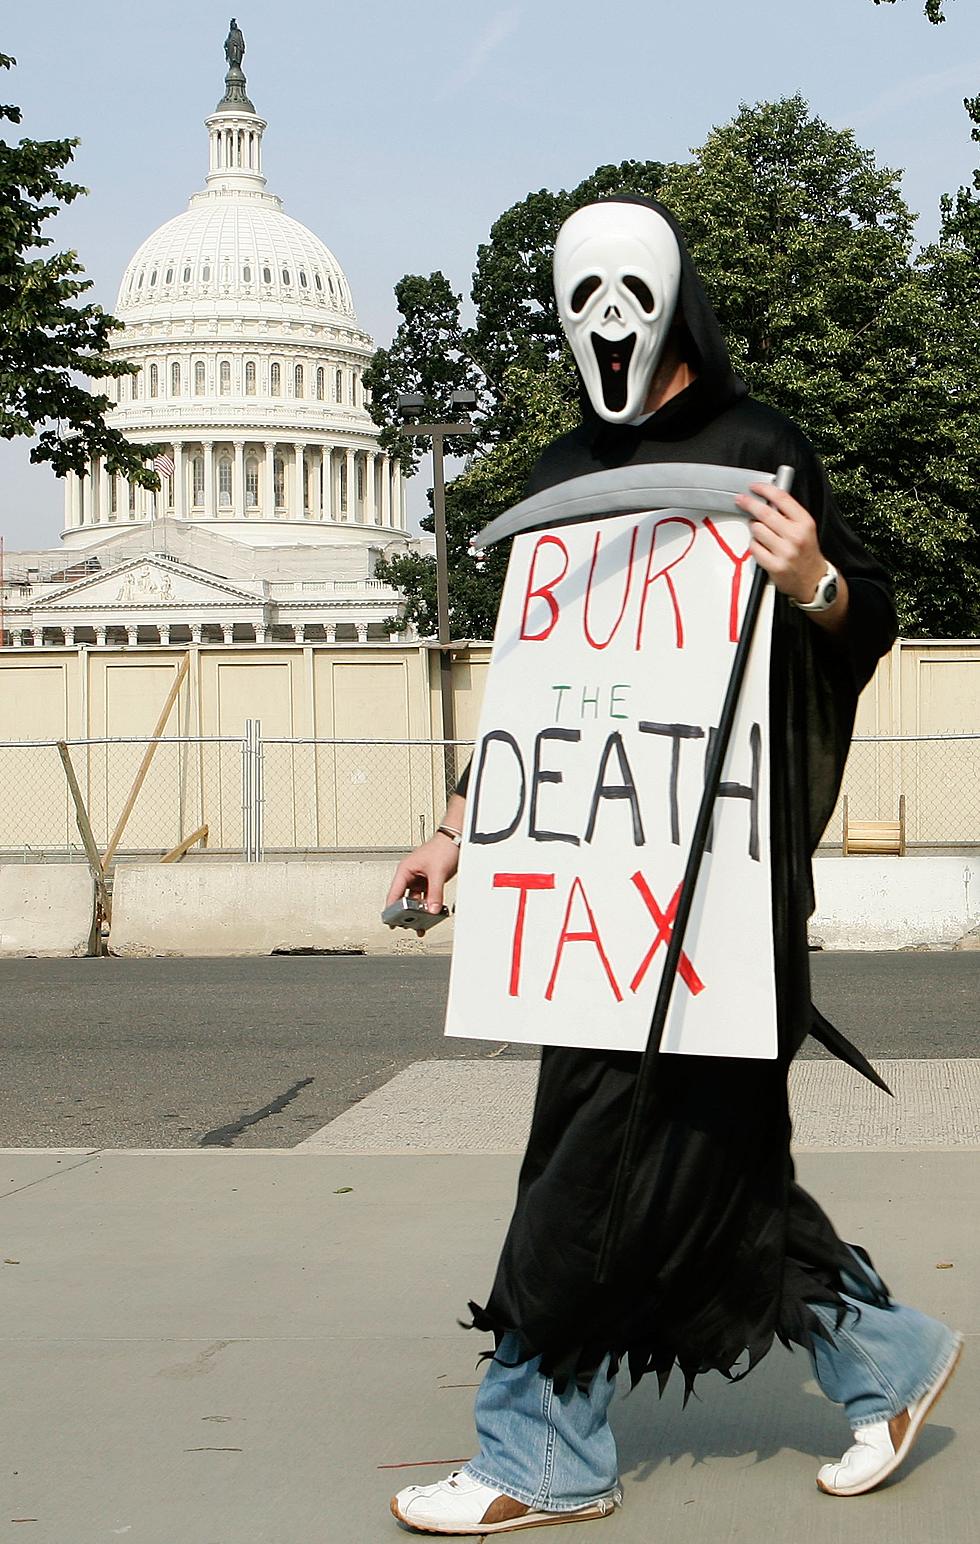 Should There Even Be A Death Tax?